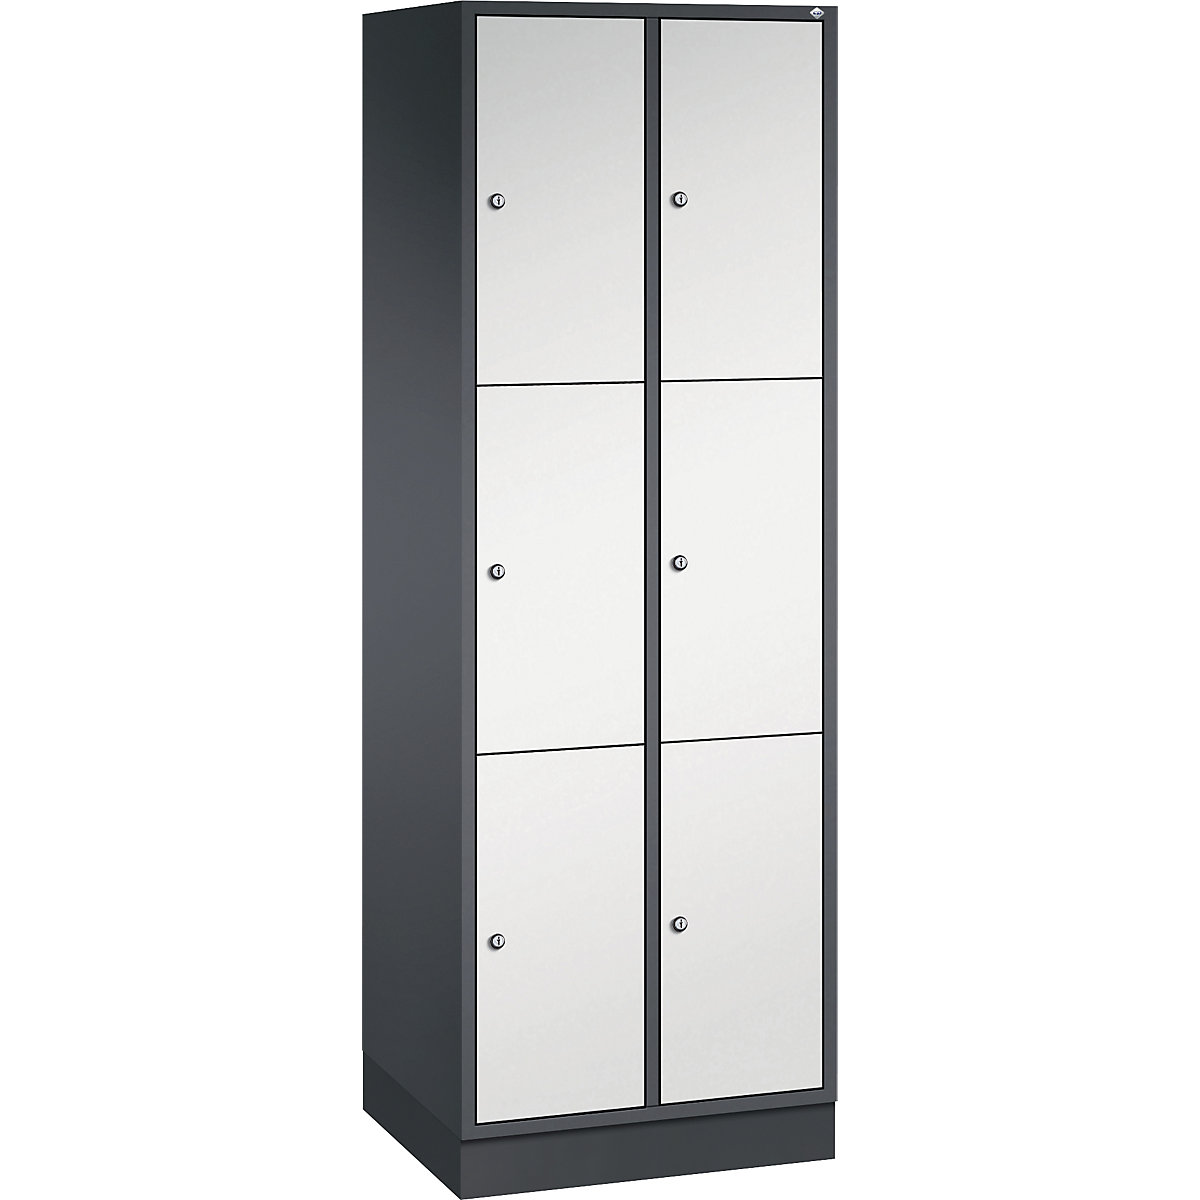 INTRO steel compartment locker, compartment height 580 mm – C+P, WxD 620 x 500 mm, 6 compartments, black grey body, light grey doors